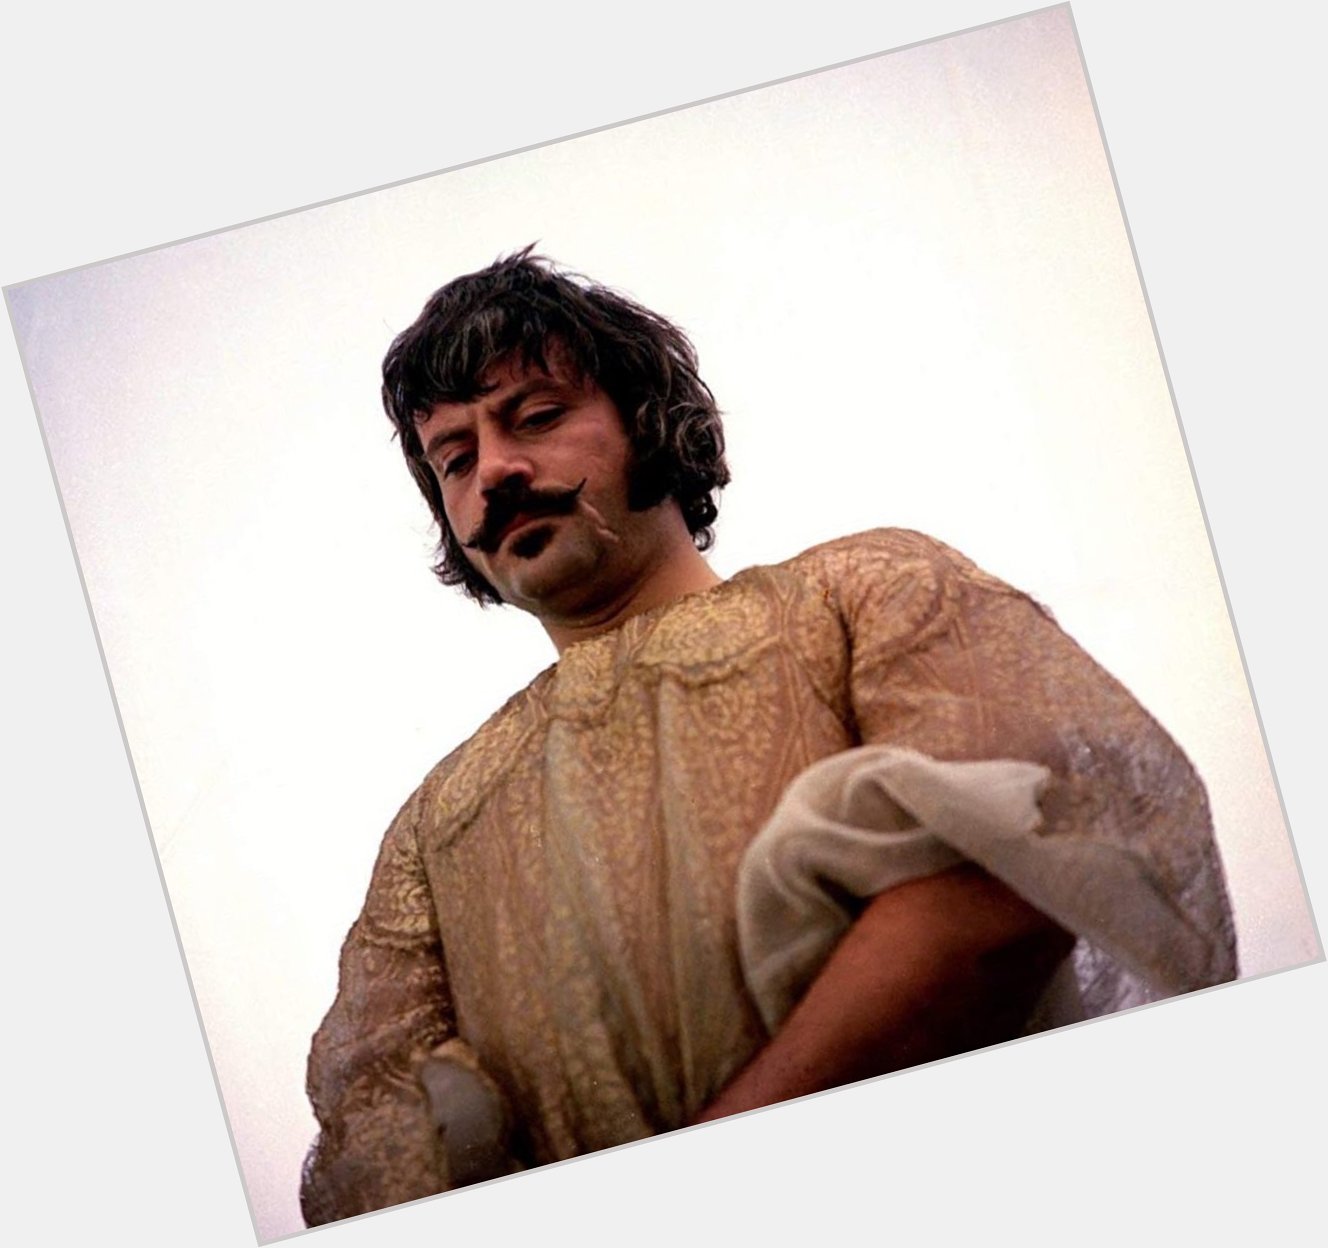 Kinda late but happy birthday oliver reed. the devils is one of the greatest movies ever made. 